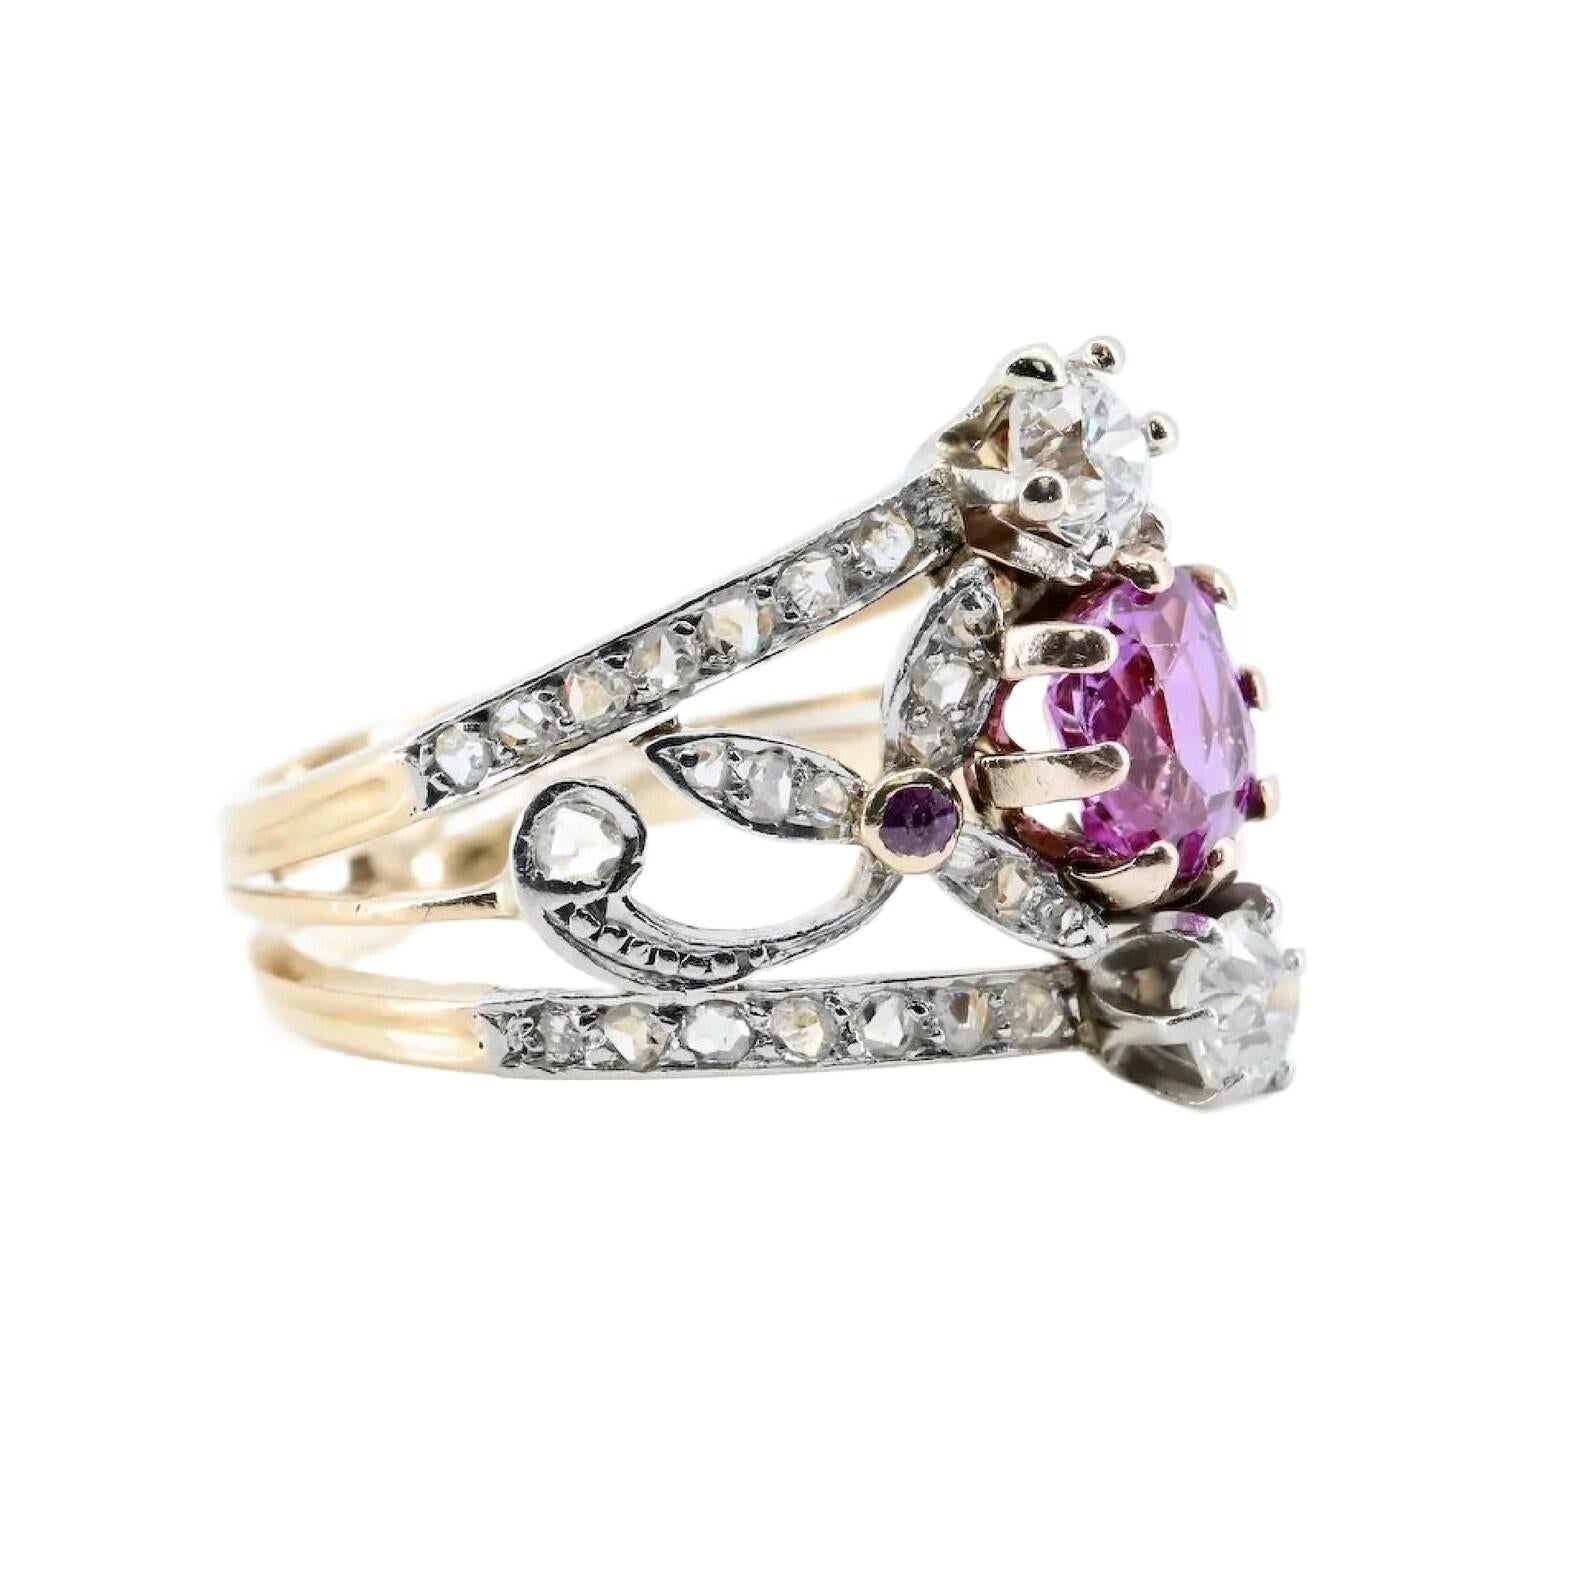 An art nouveau period natural no heat pink sapphire, and diamond ring in platinum topped 18 karat gold.

Centered by a beautiful purplish pink old mine cushion cut sapphire. The sapphire accompanied by a GIA report stating it is Natural, and shows